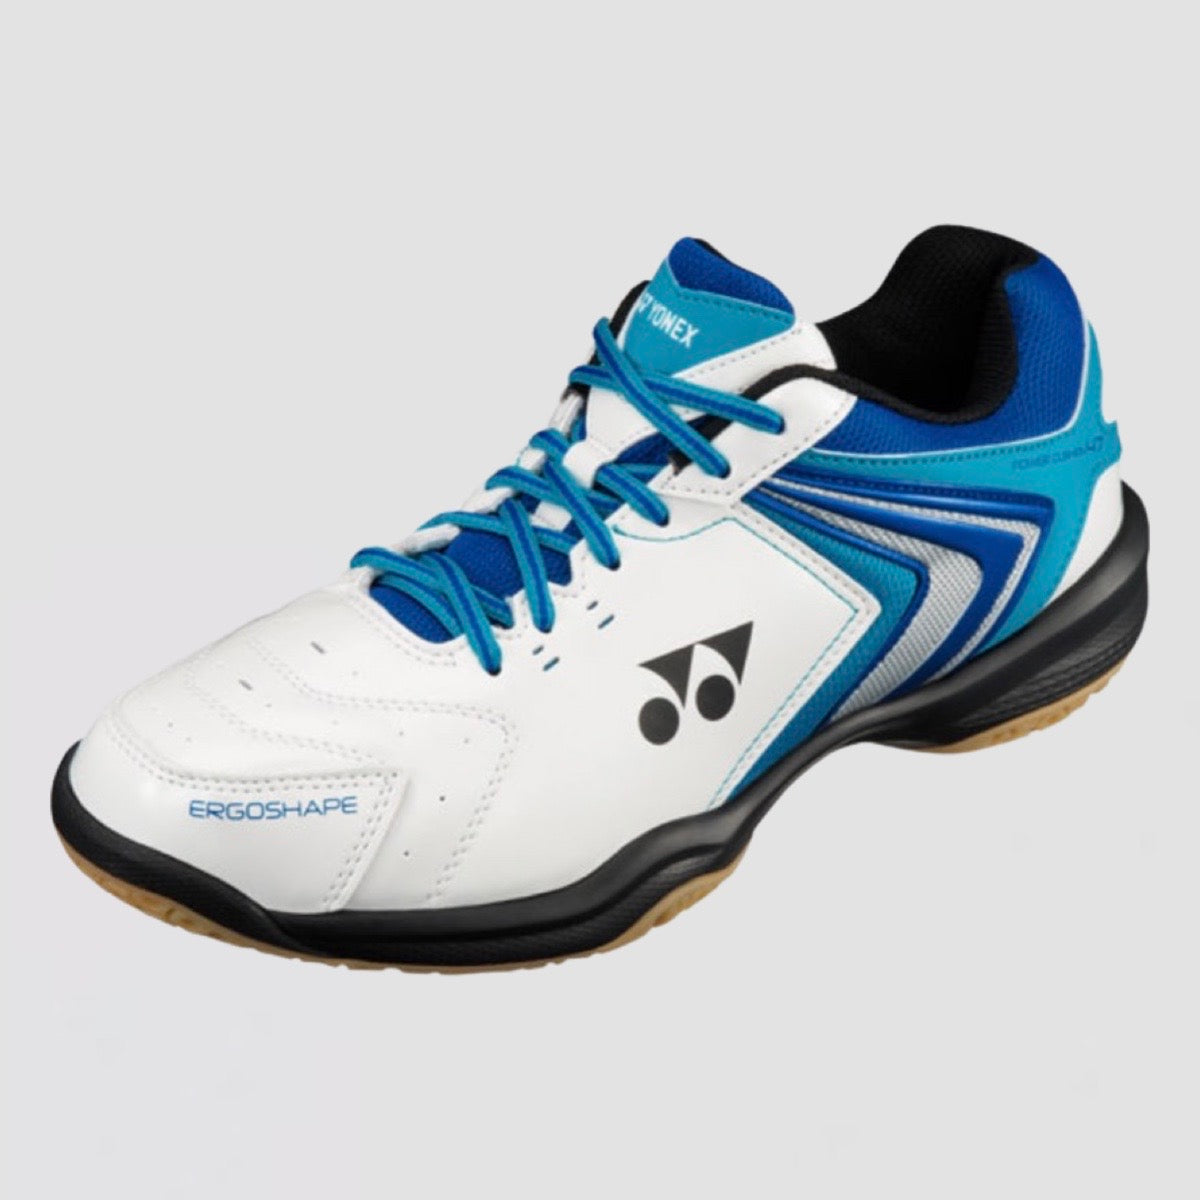 Badminton Shoes With Price Match Promise - Shop Now!